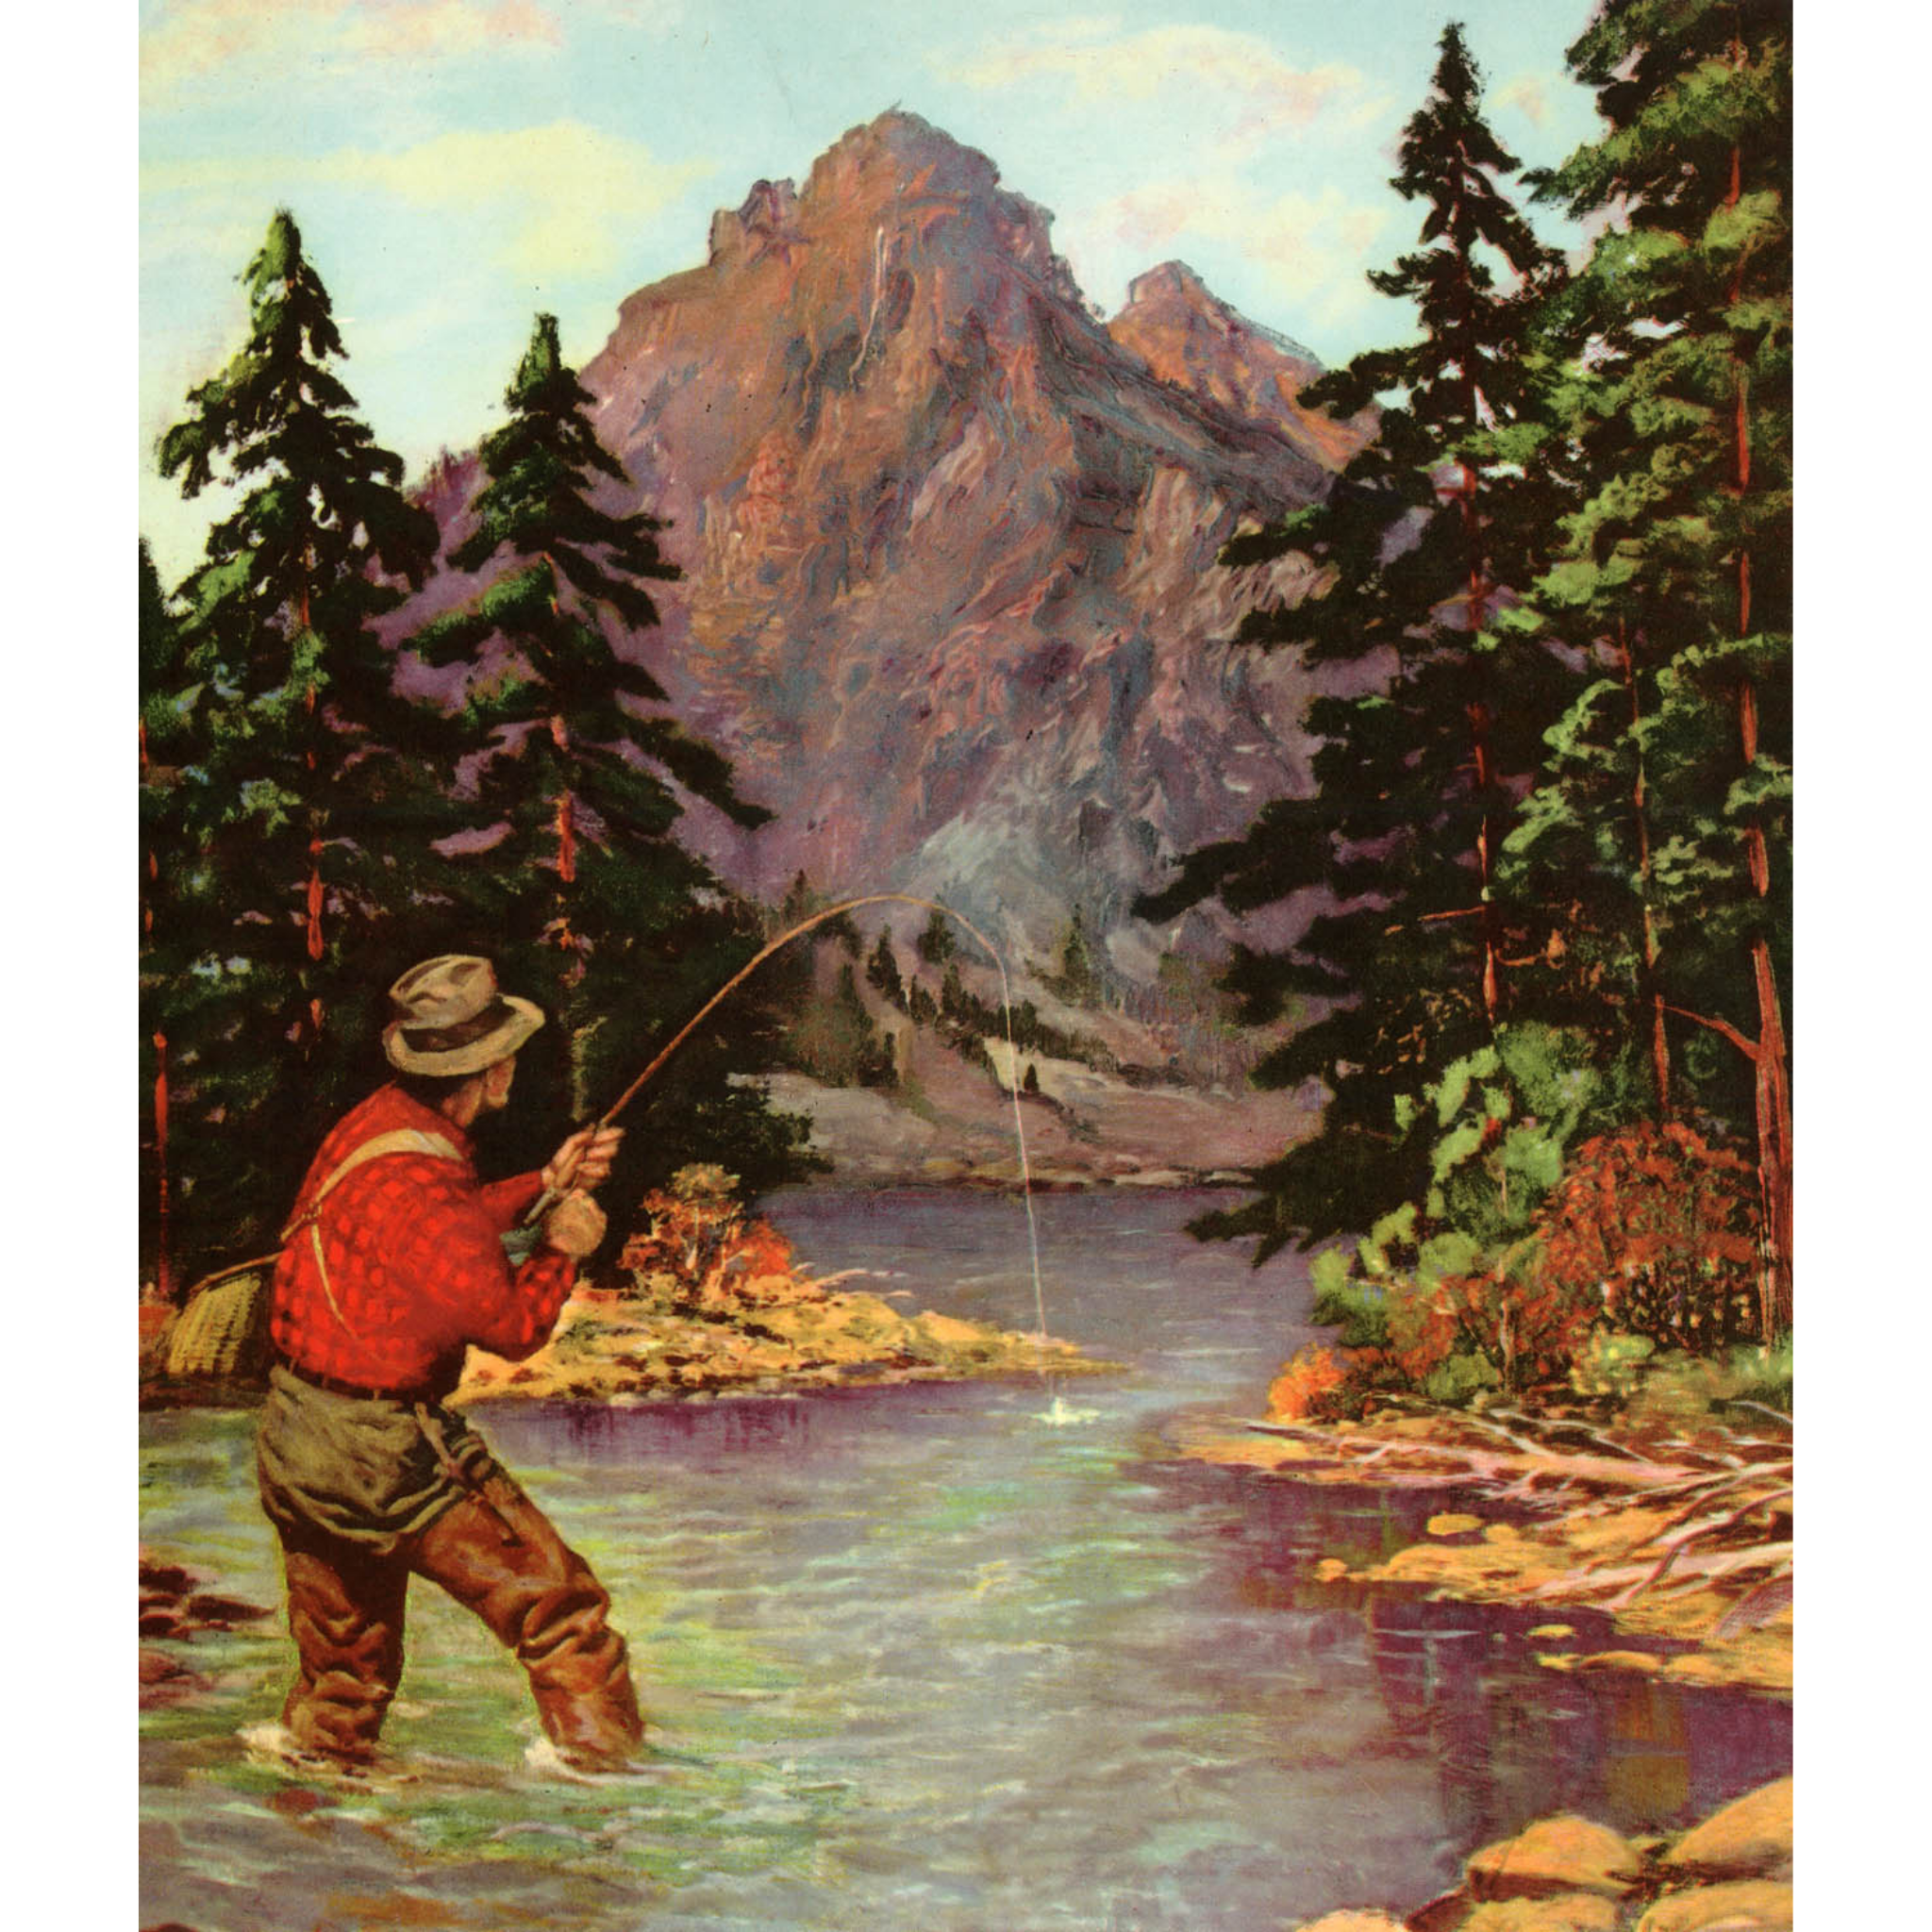 Man Fishing in Stream - ca. 1950 Lithograph